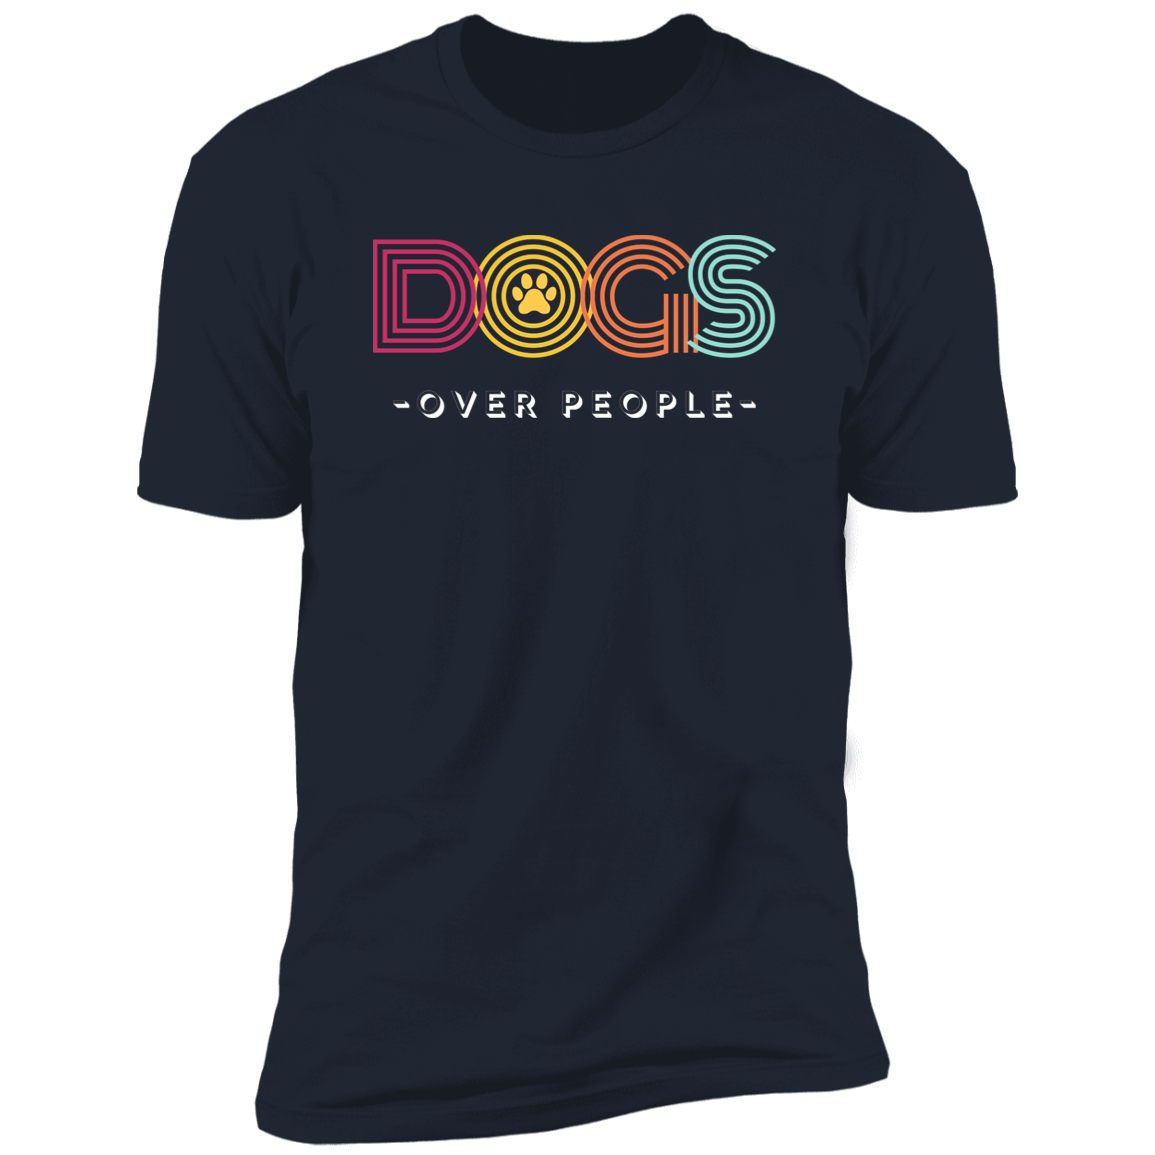 Dogs Over People t-shirt, funny dog shirt for humans, in navy blue